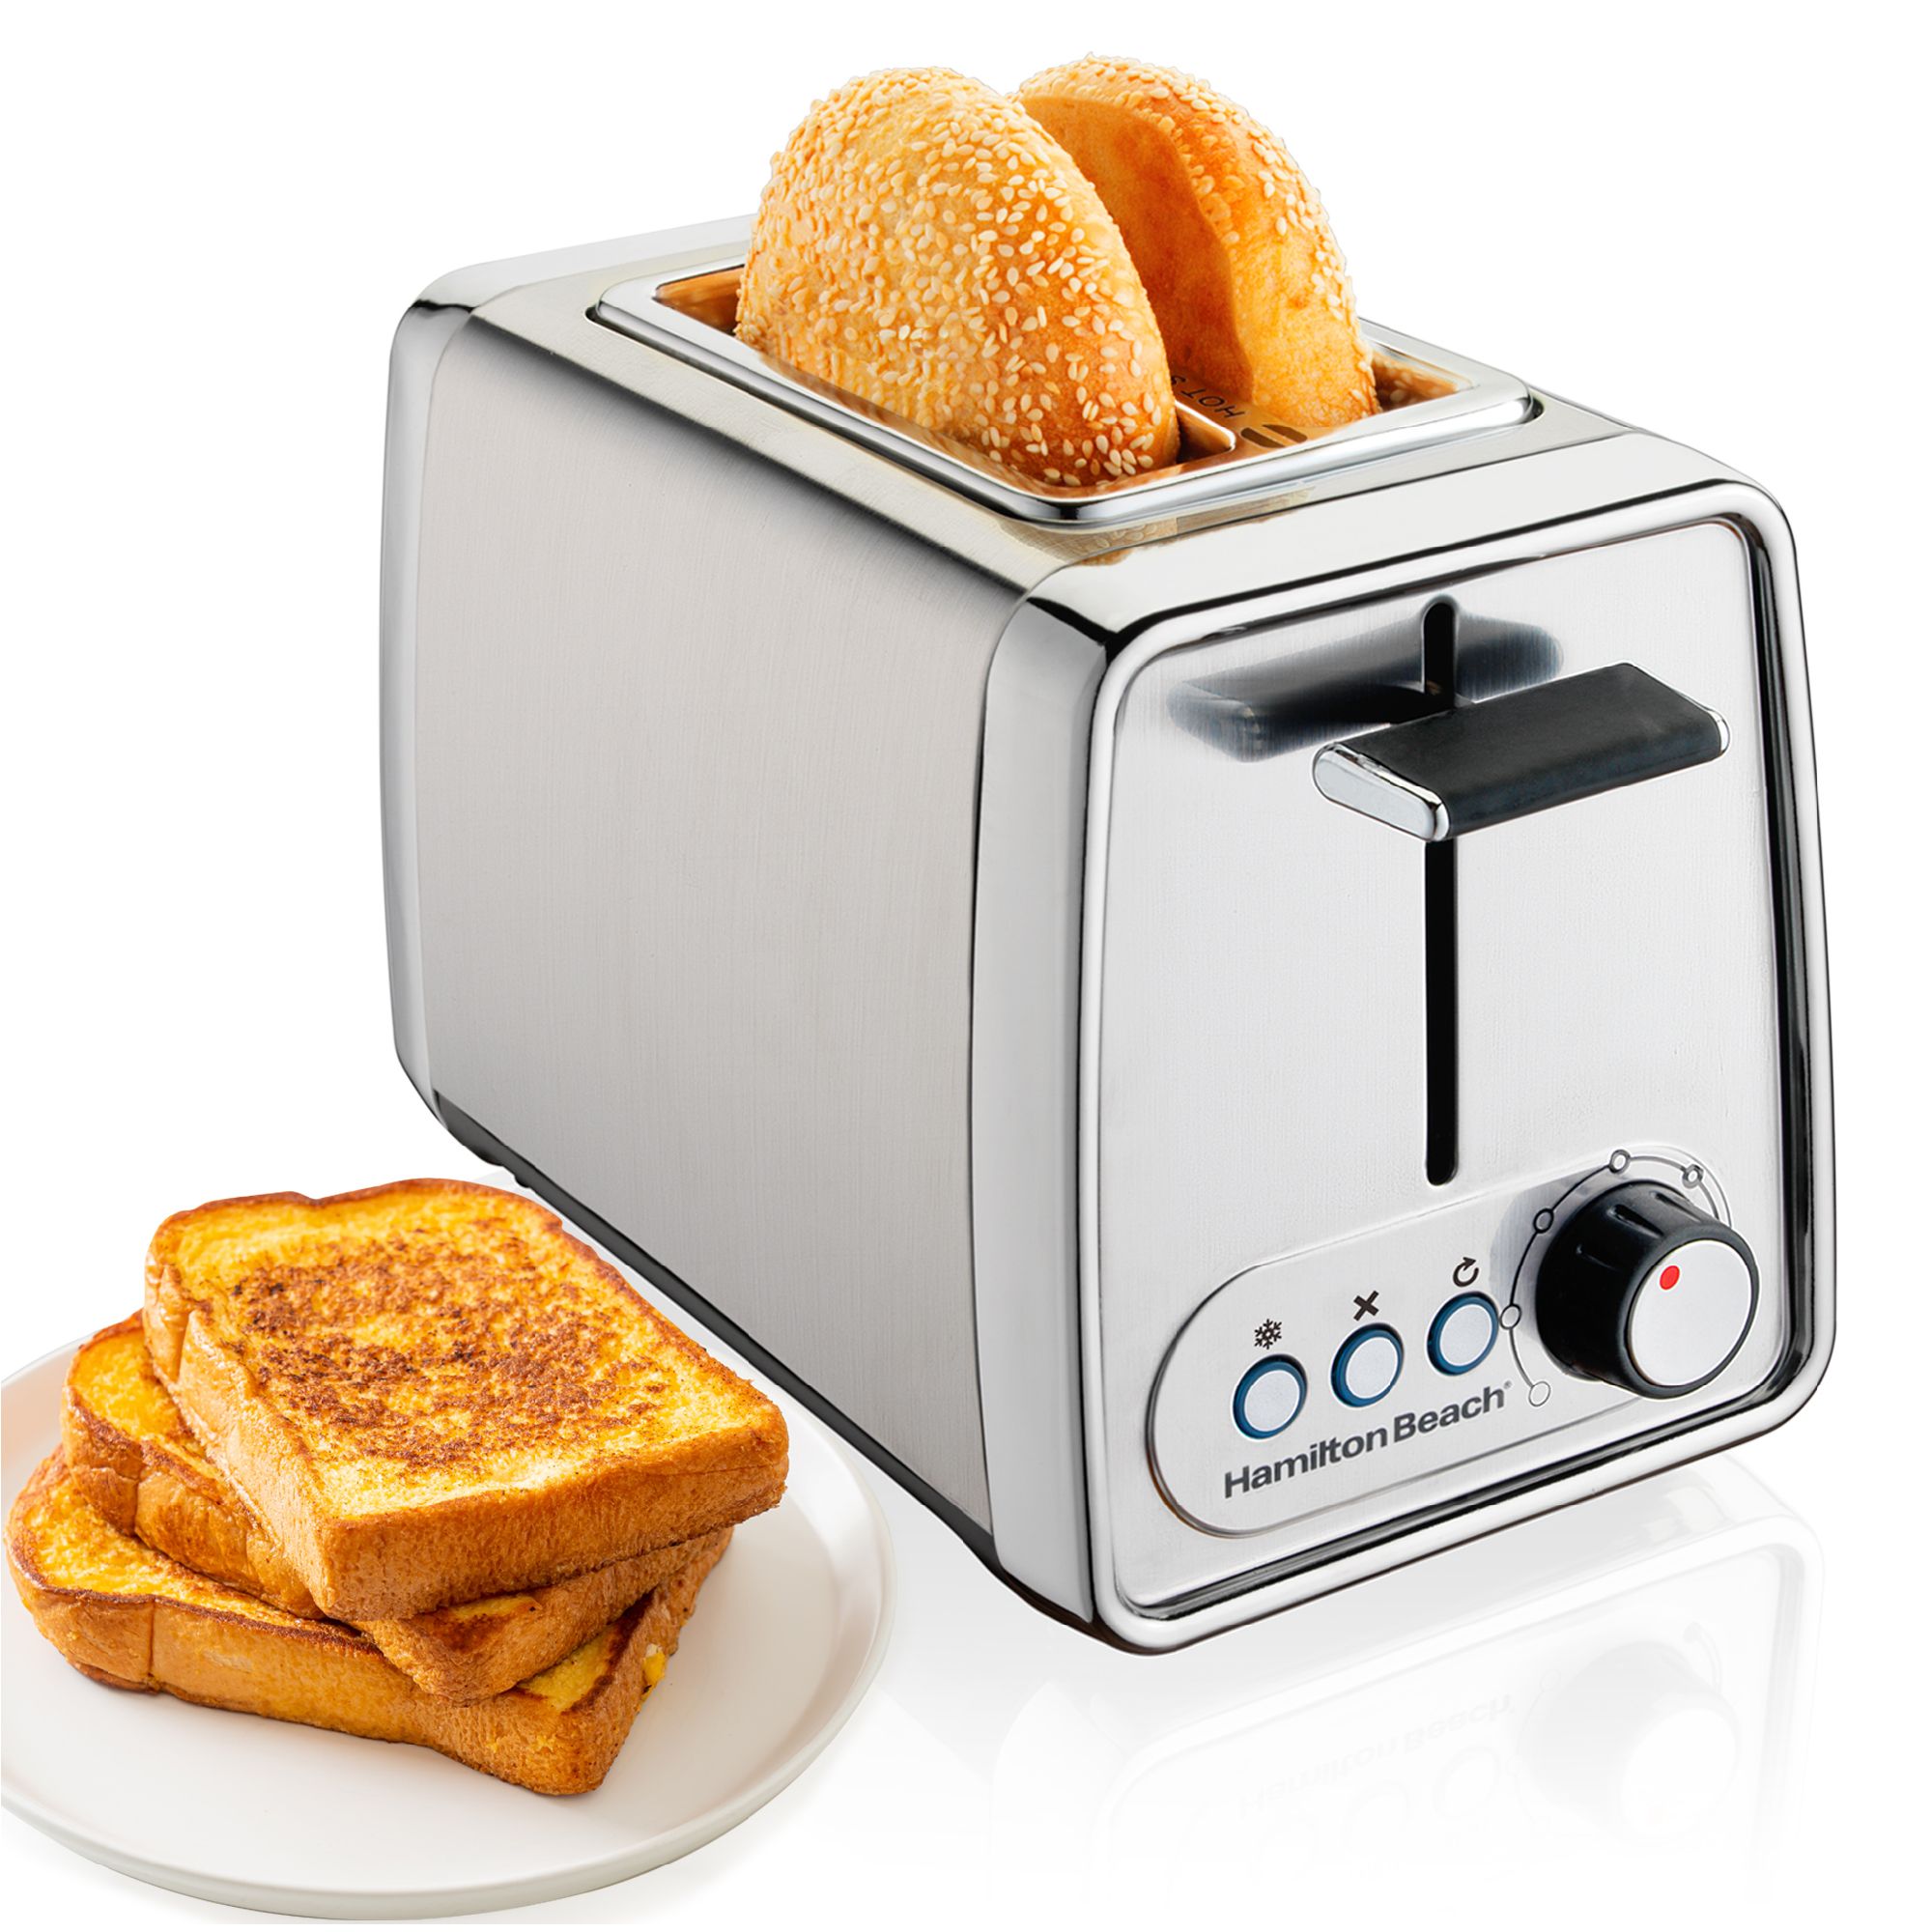 Metal 2 Slice Wide Slot Toaster, Bagel & Defrost Settings, Bun Warmer, Shade Selector, Toast Boost, Slide-Out Crumb Tray (925 Watts, Black)